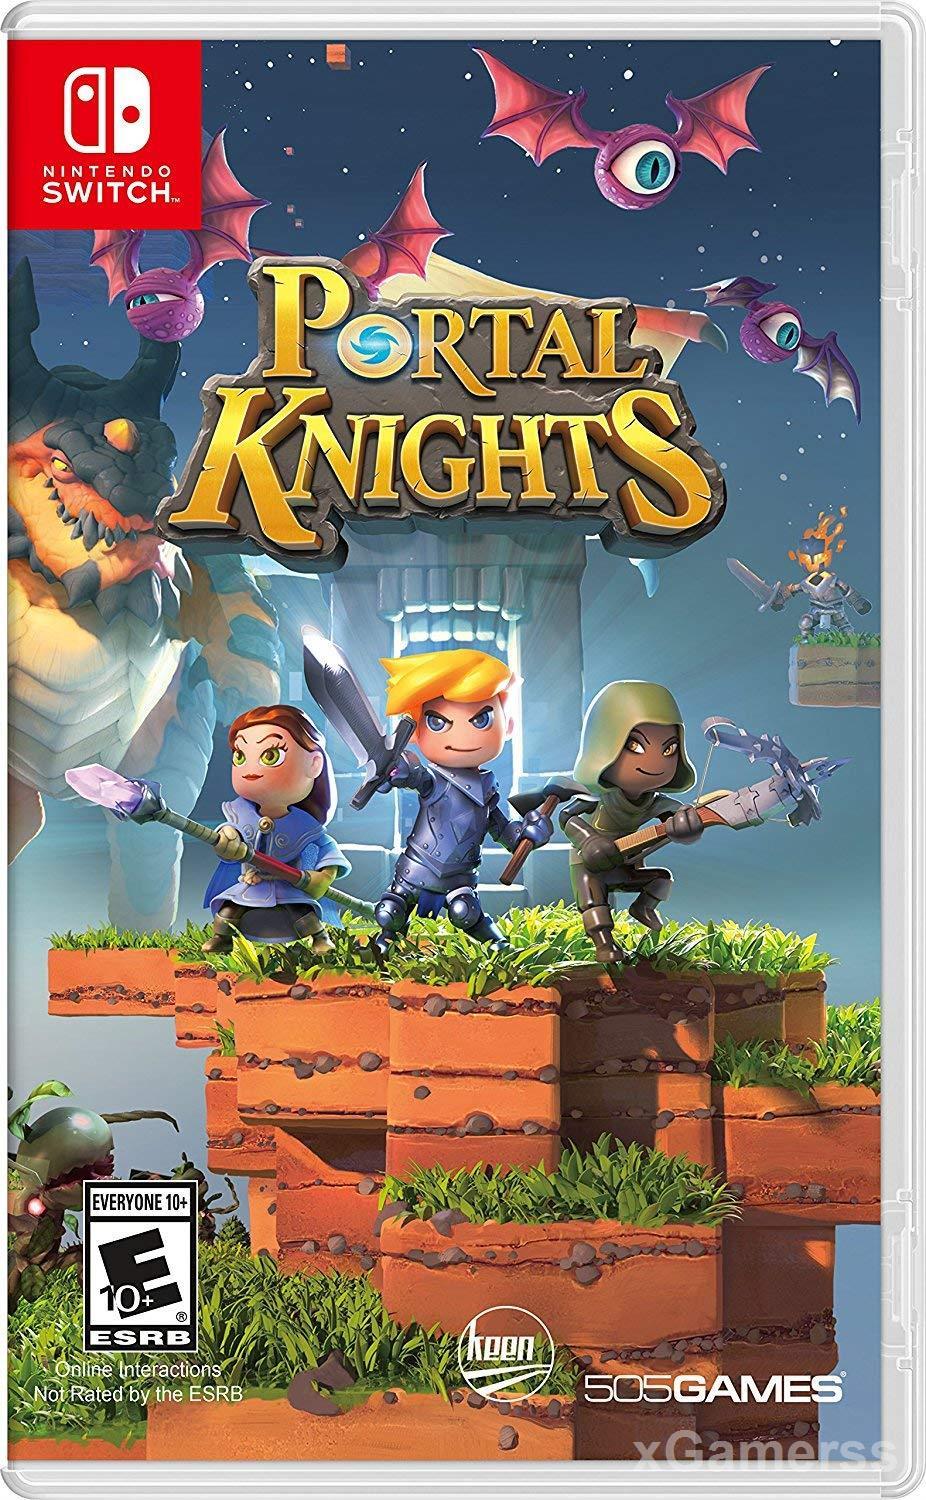 Portal Knights is a game that will help you to transform yourself into an architect